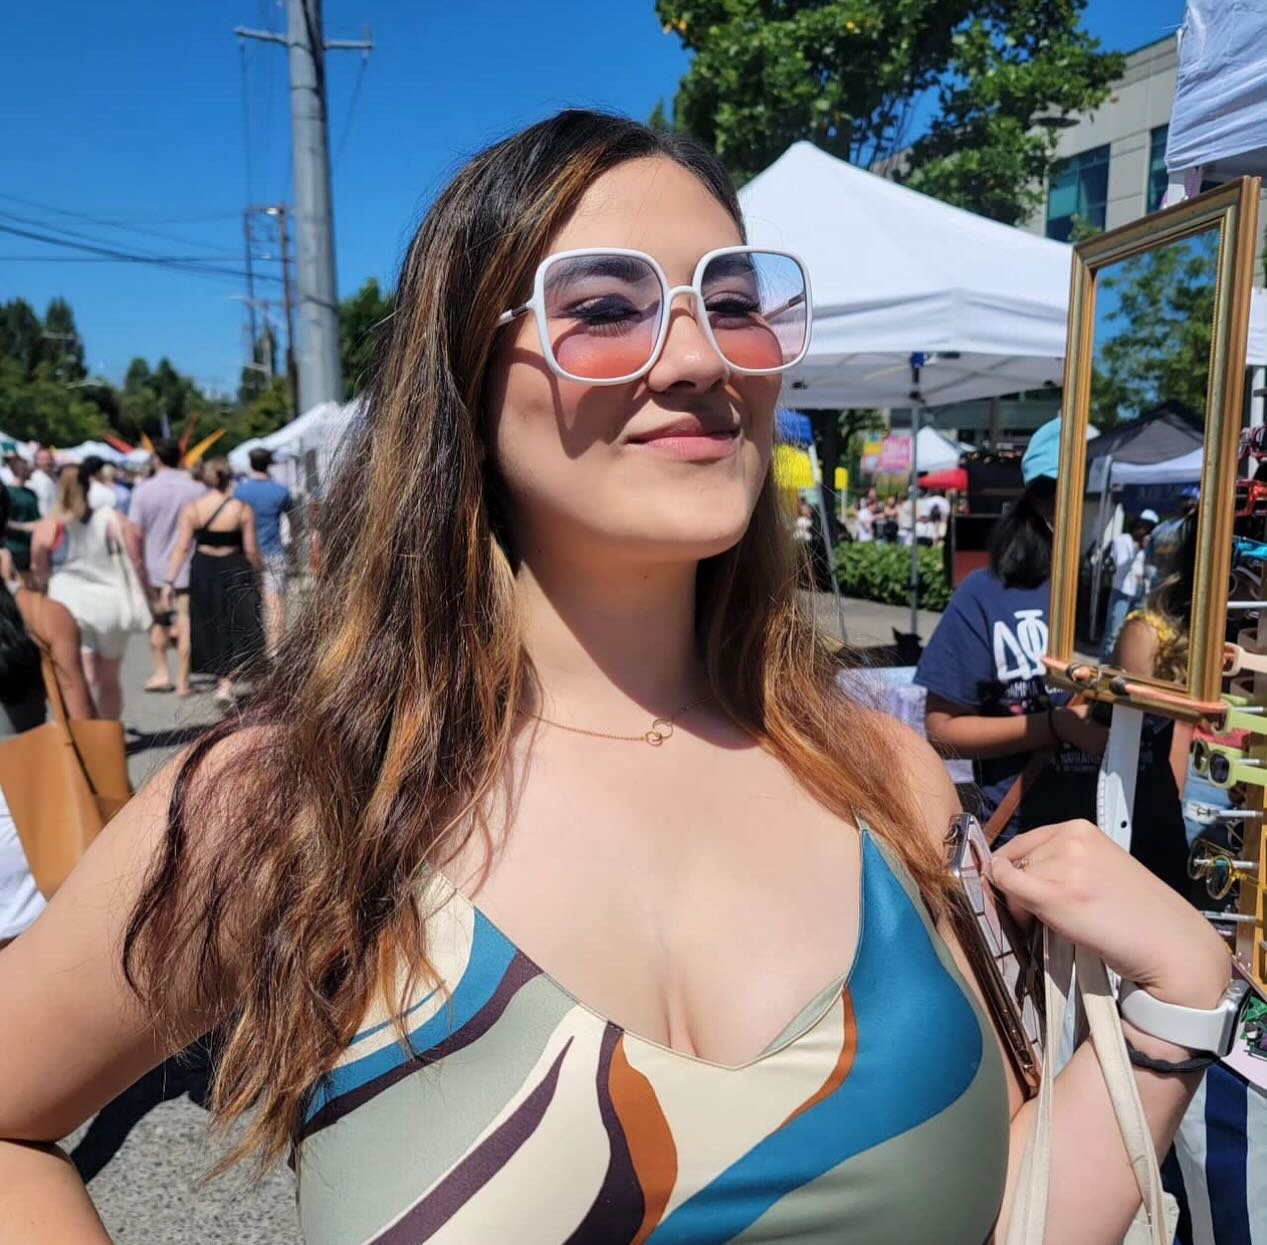 Summer shades season is officially here! Come swing by @sunwinkseattle this Sunday for the best deal in town and some summery vibes! #fleamarket #fremontsundaymarket